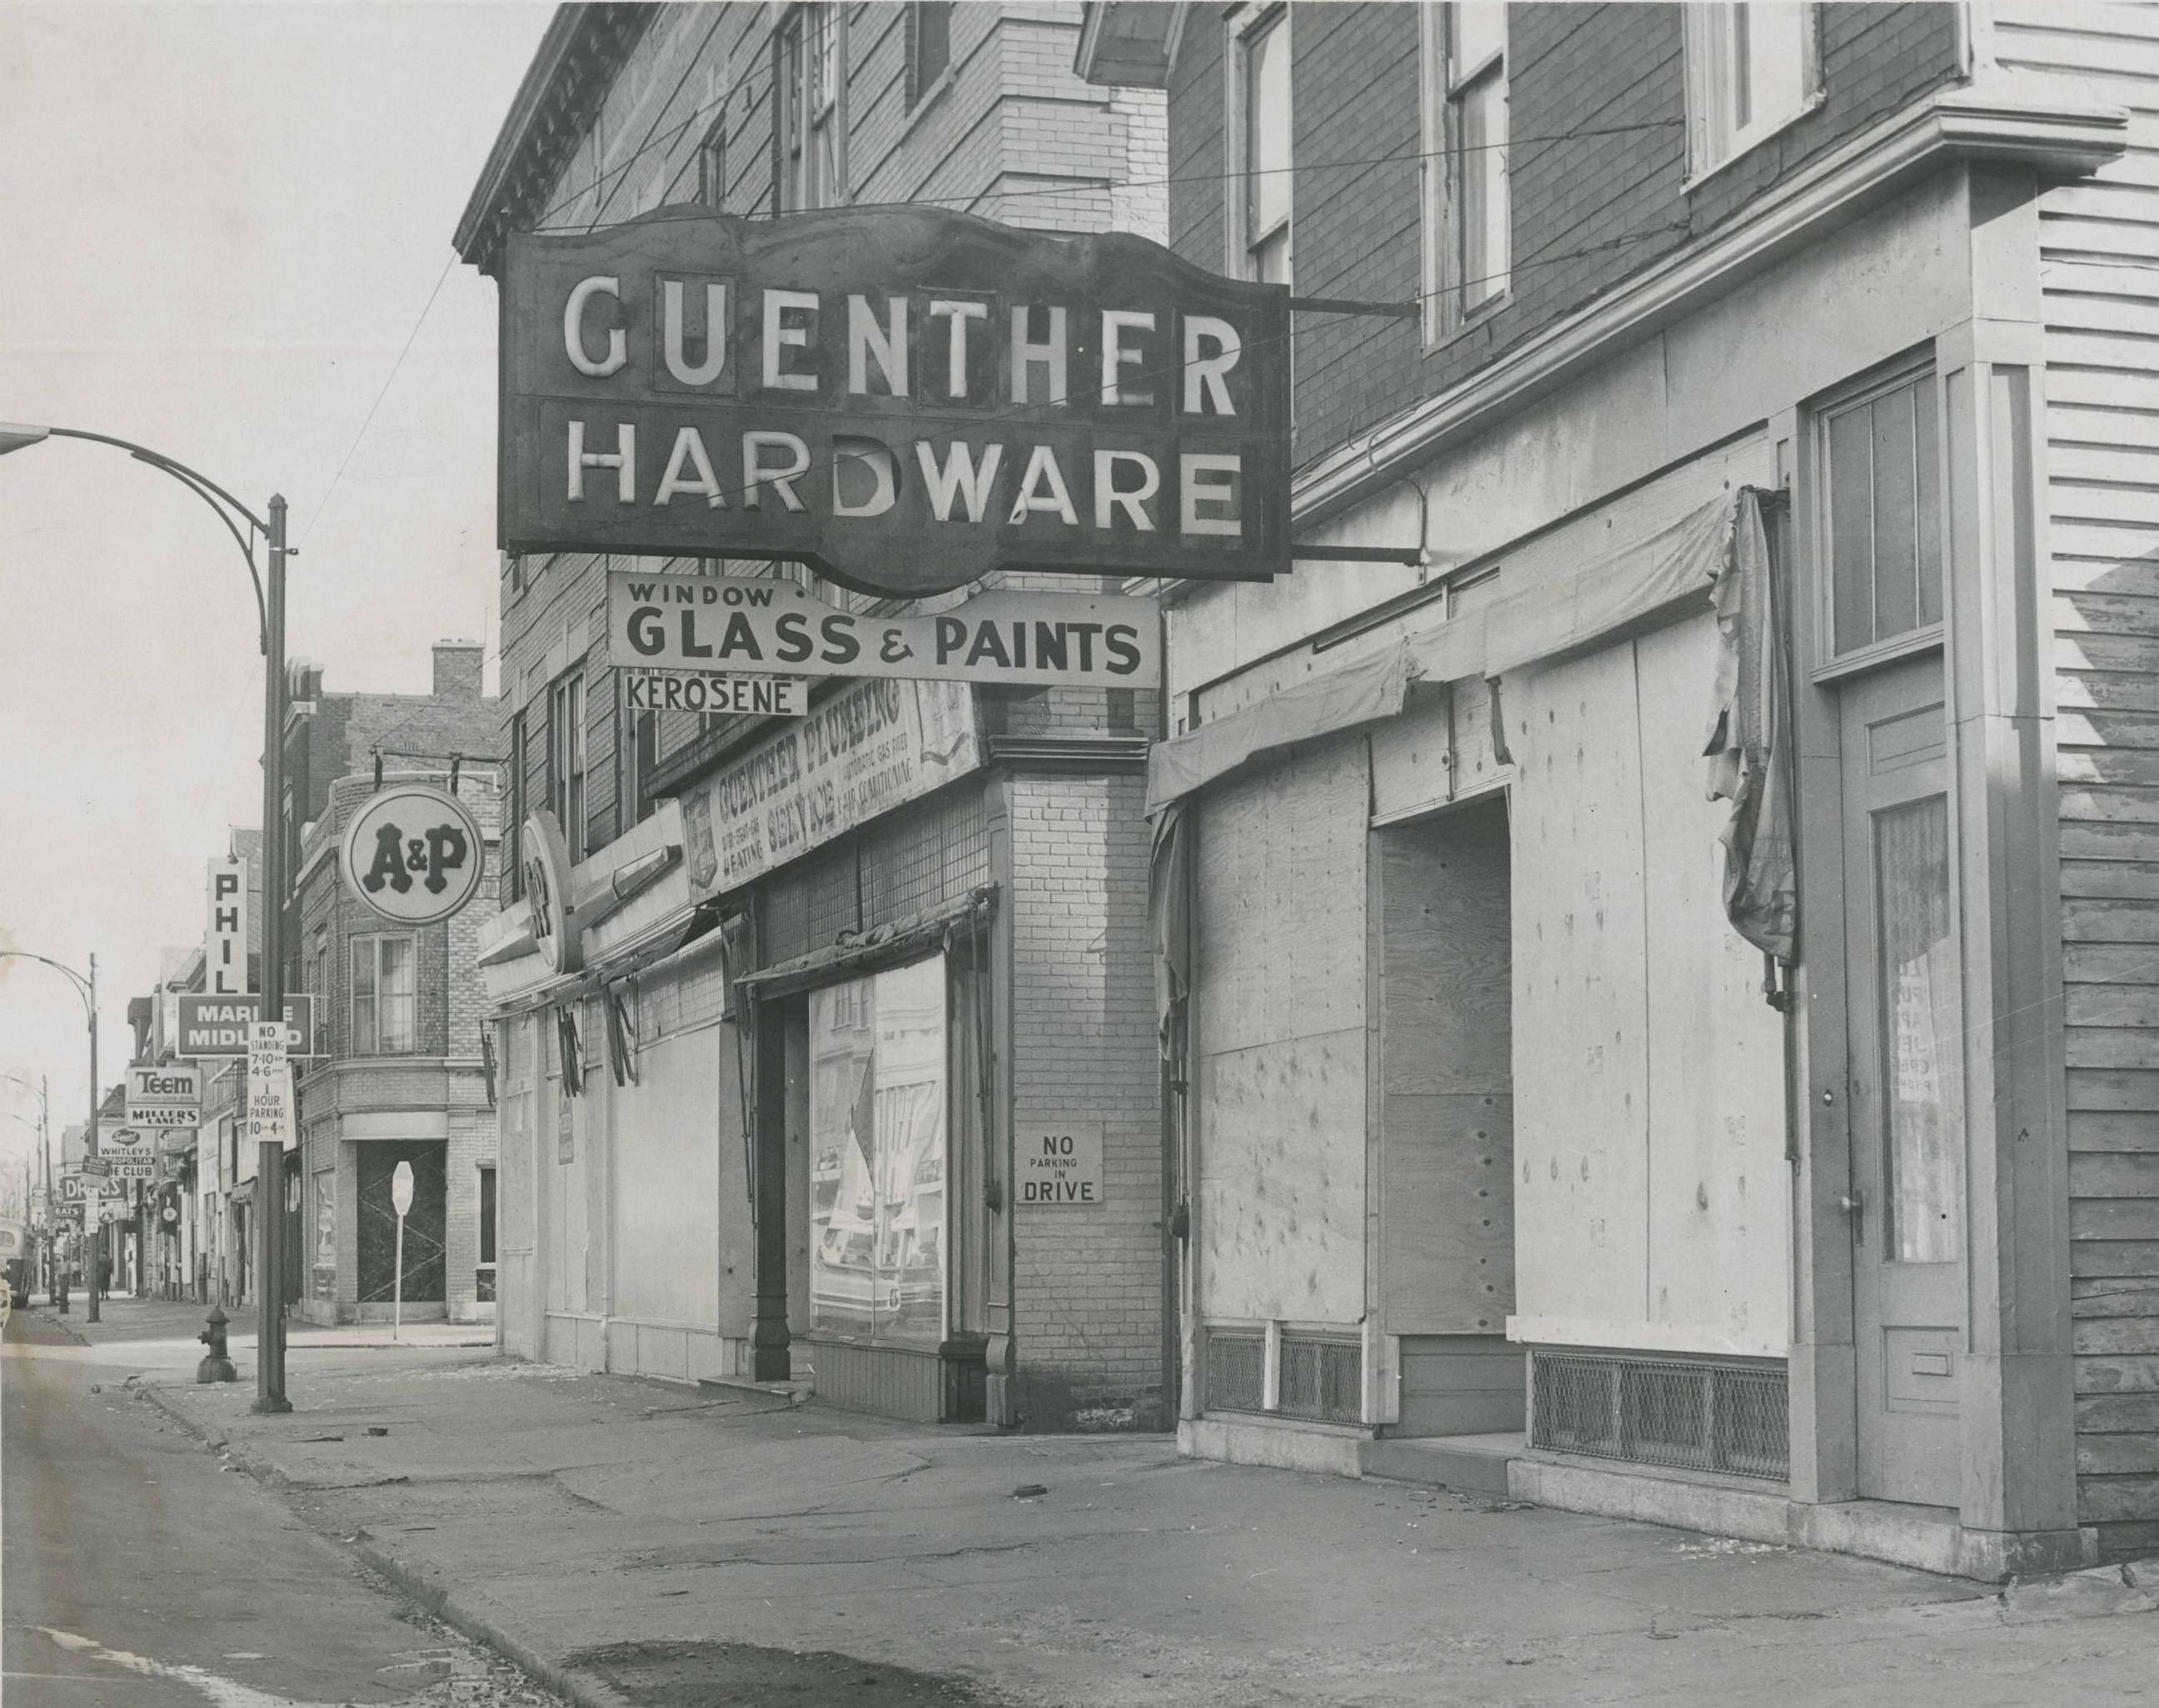 PHOTO: Guenther Hardware at 1279 Jefferson Ave. boarded up after the 1967 race riot on the east side of Buffalo, New York.